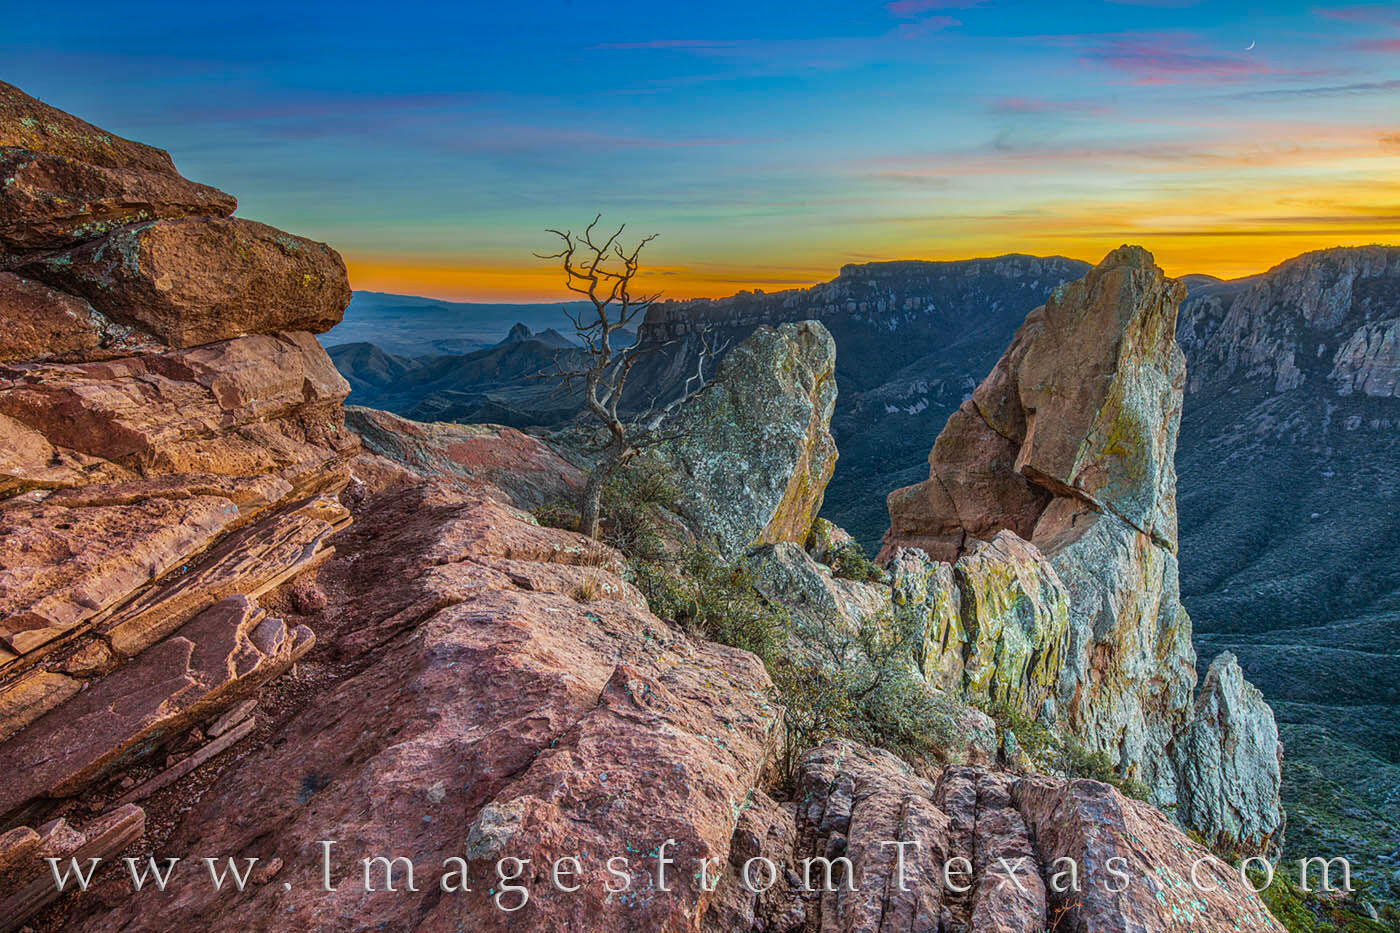 I've shot from the top of the Lost Mine trail many times at sunset. Each time, I've been the last one remaining on this rocky...